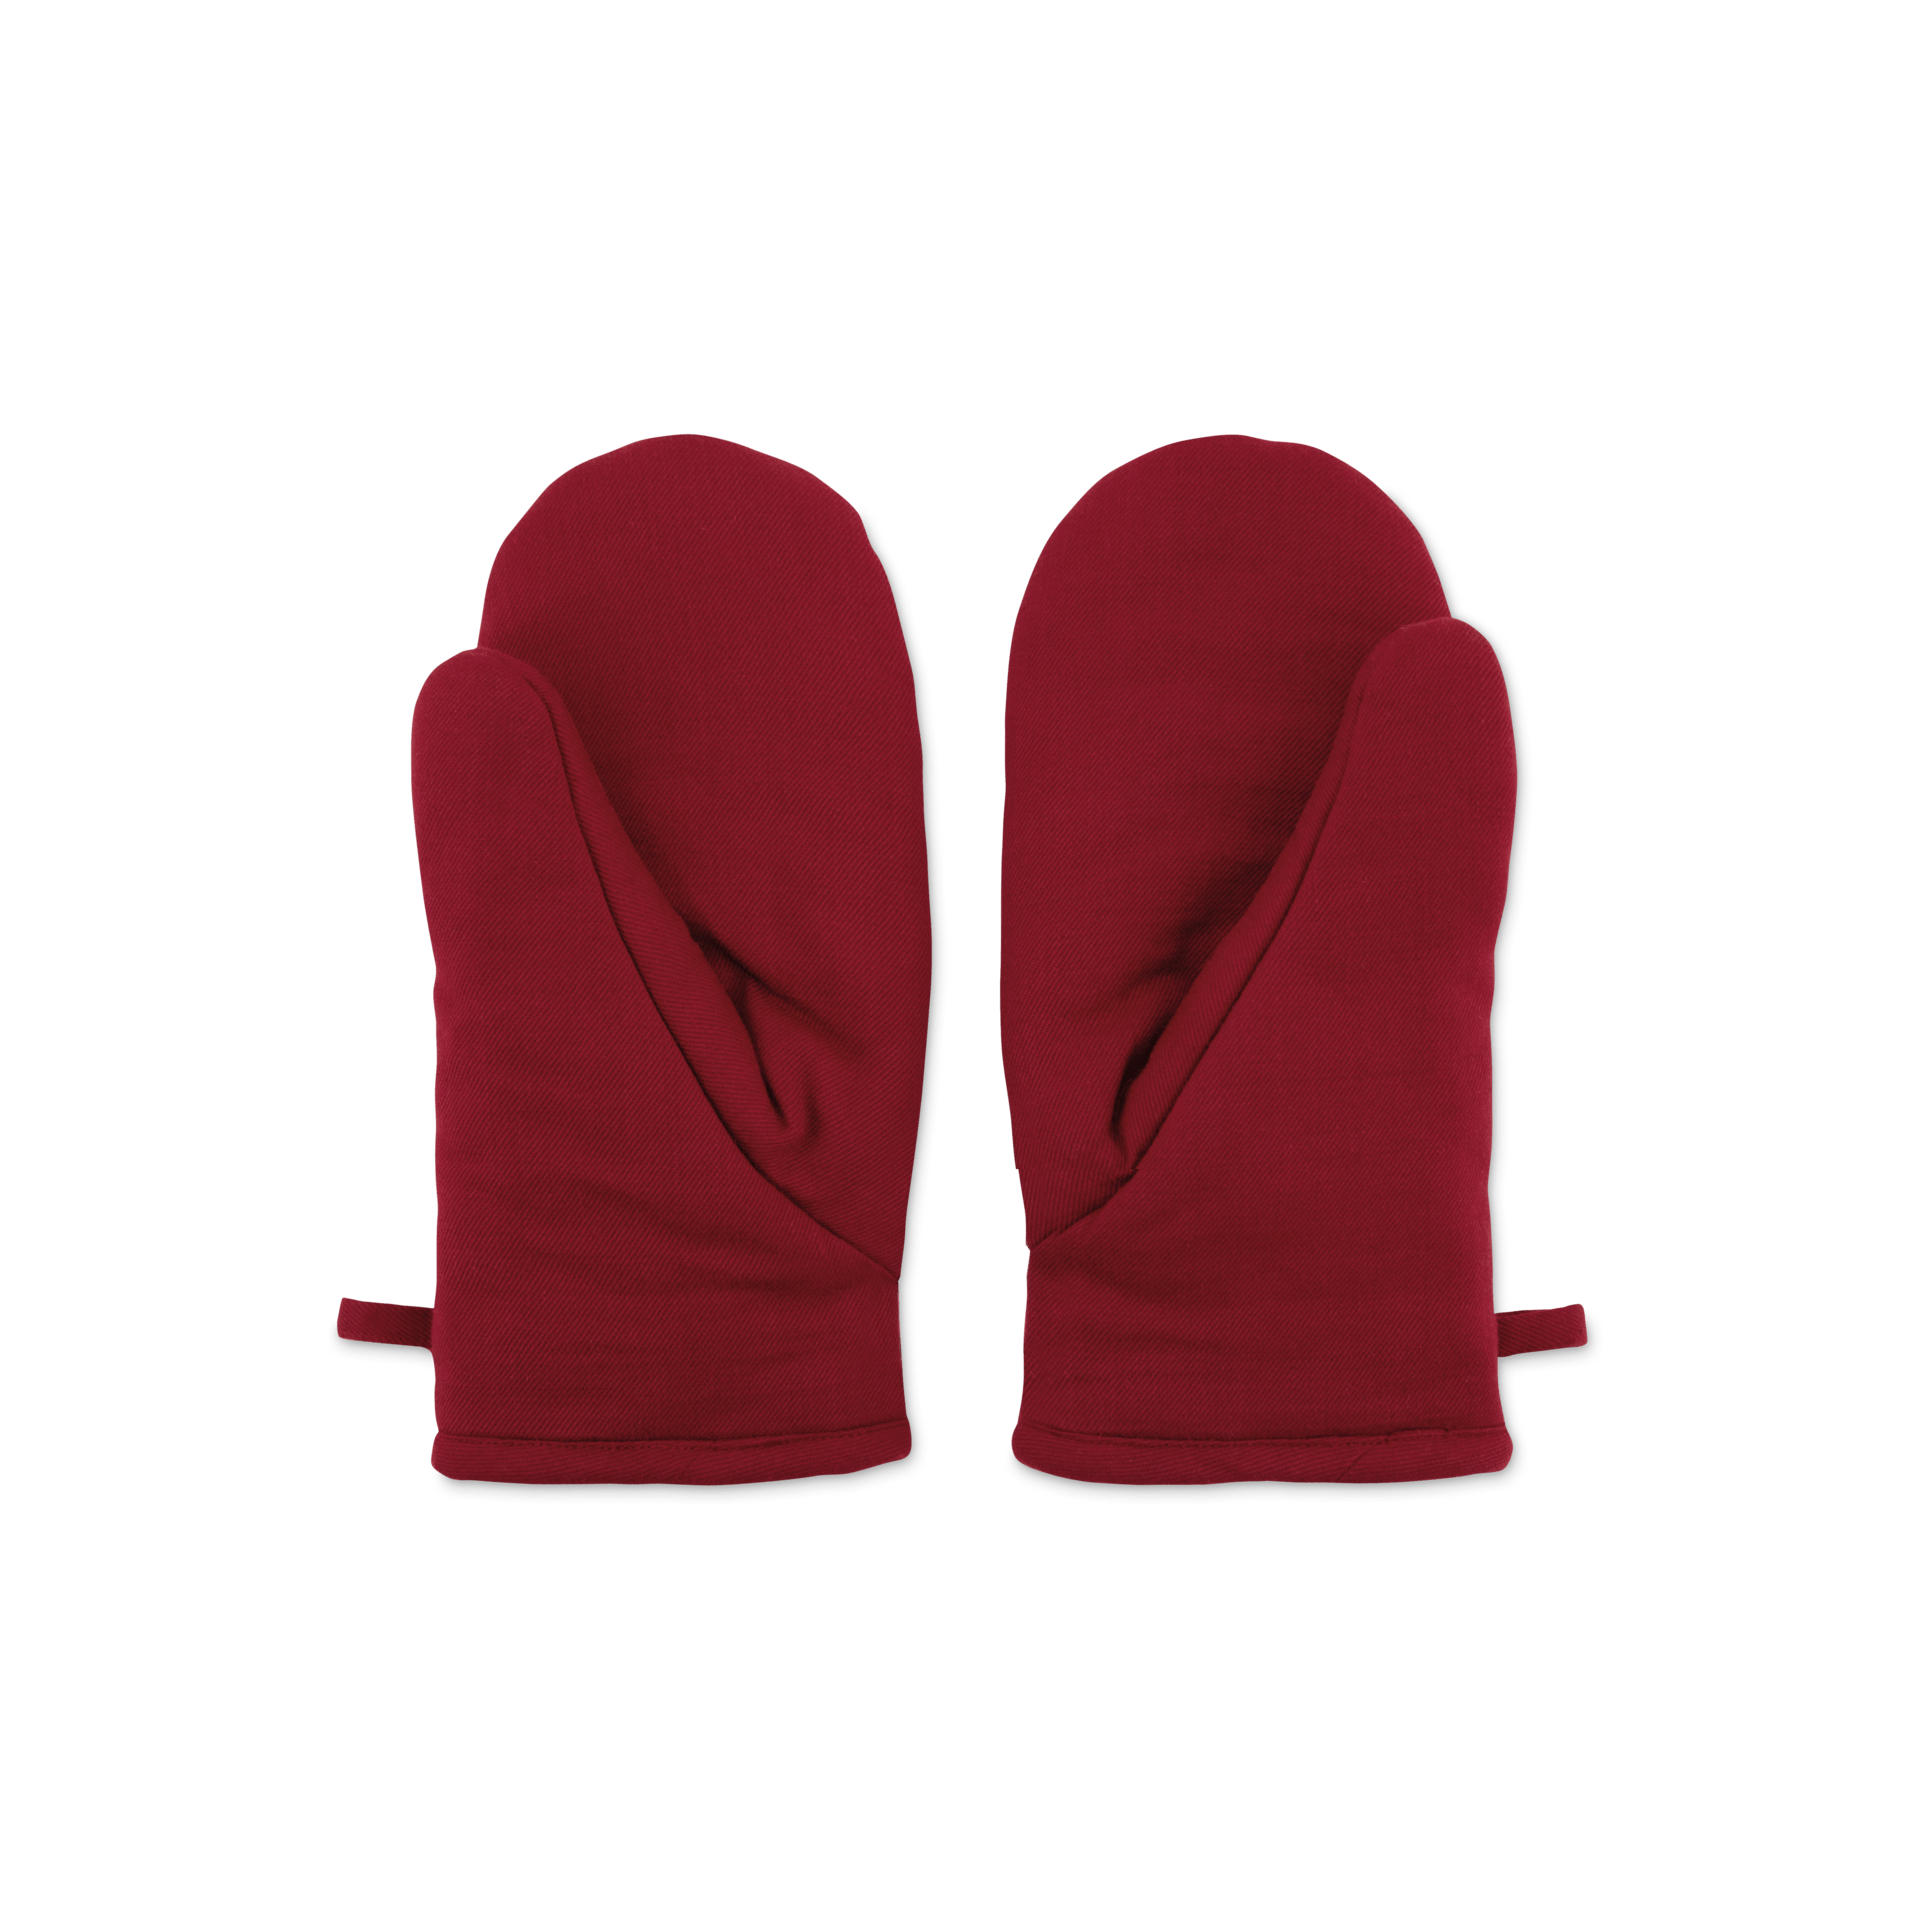 Oven mitts No. 1, set of 2